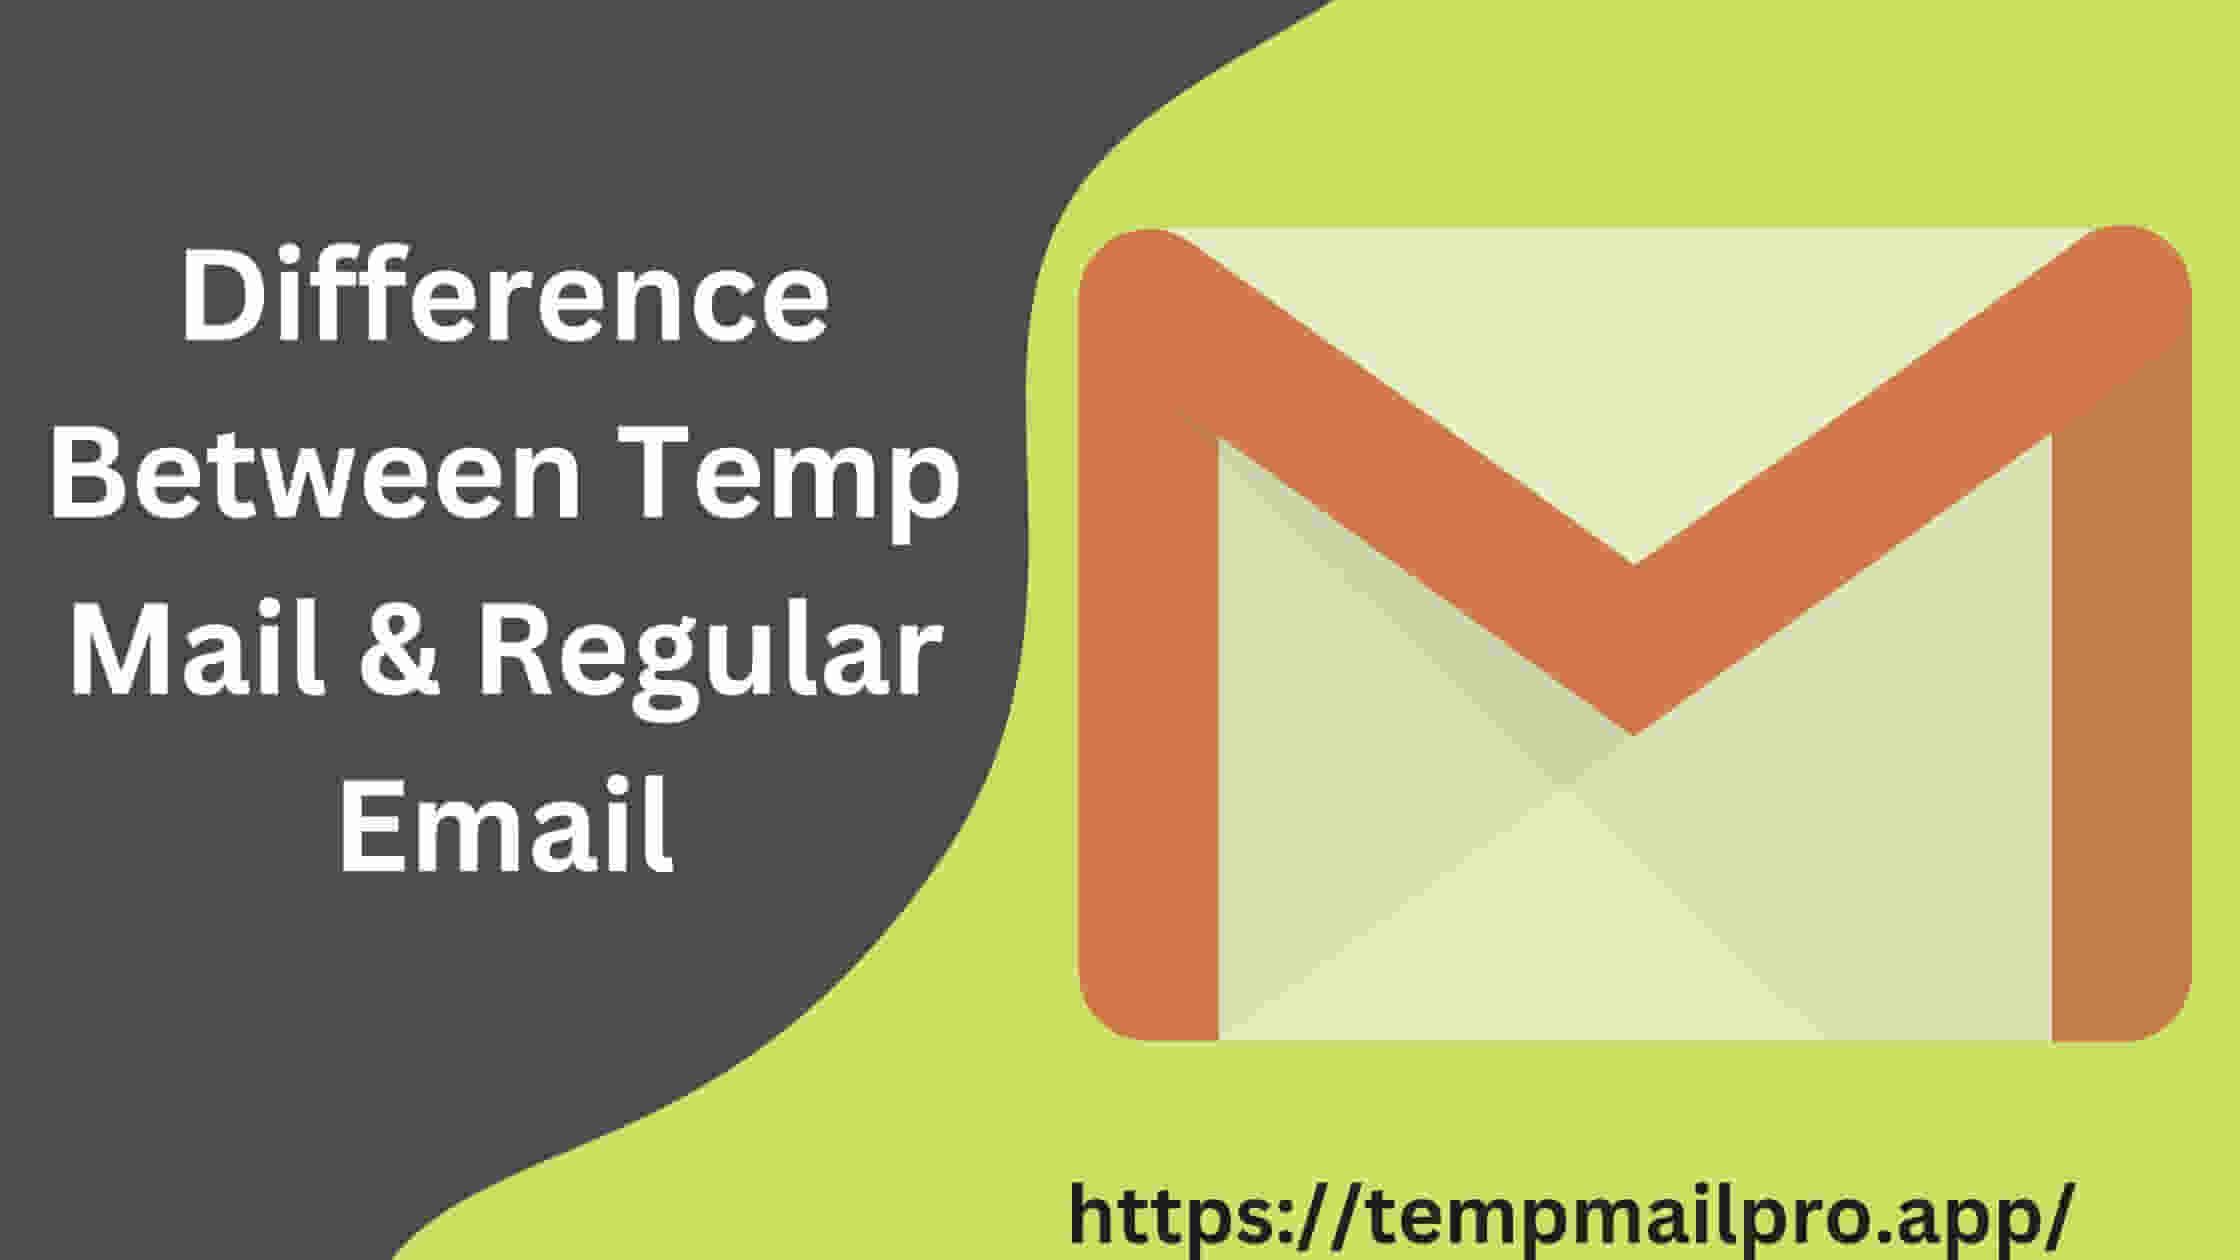 What Is The difference Between Temp Mail And regular Email?